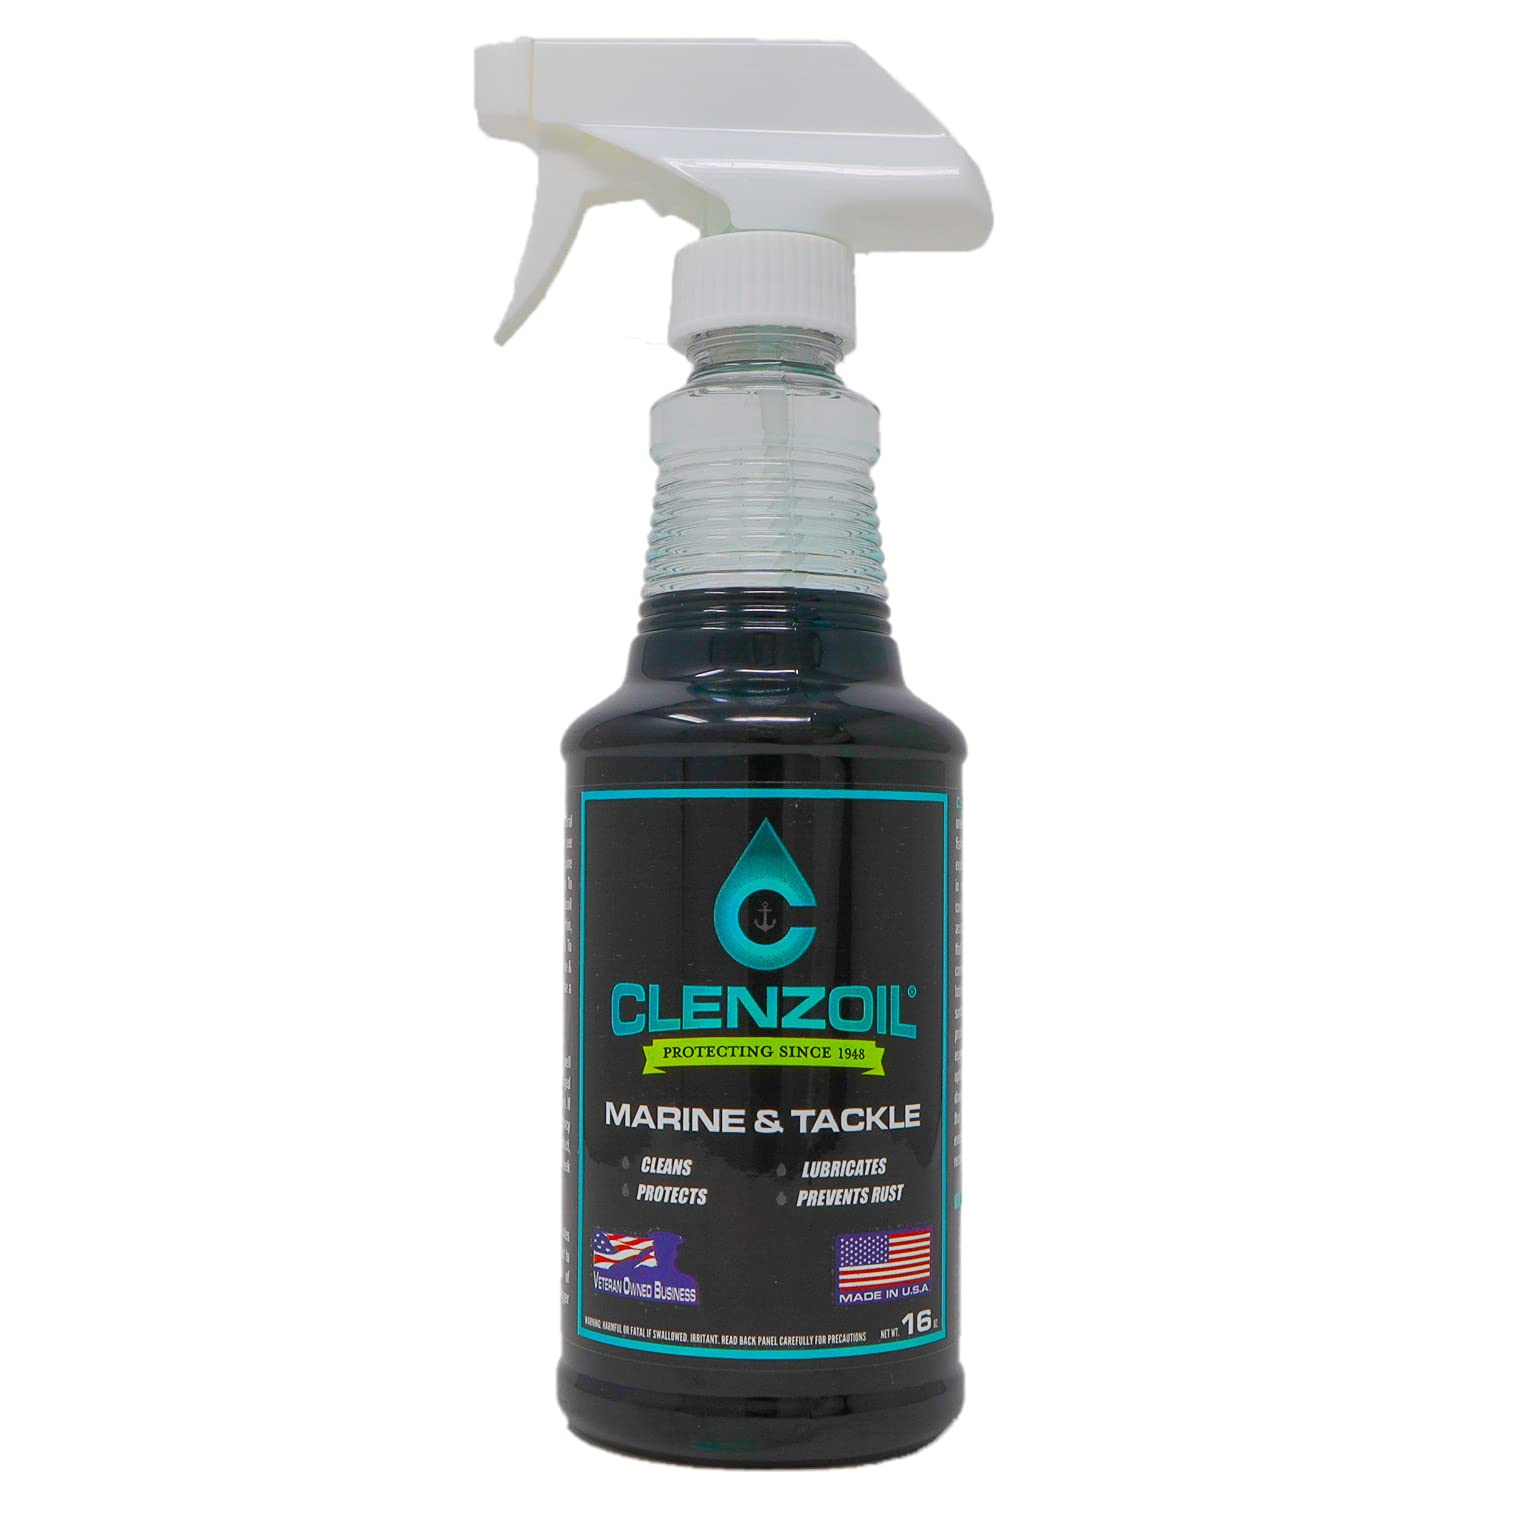  Clenzoil Marine & Tackle Rust Prevention Spray Lubricant &  Corrosion Inhibitor, One-Step Cleaner, Lubricant, Protectant